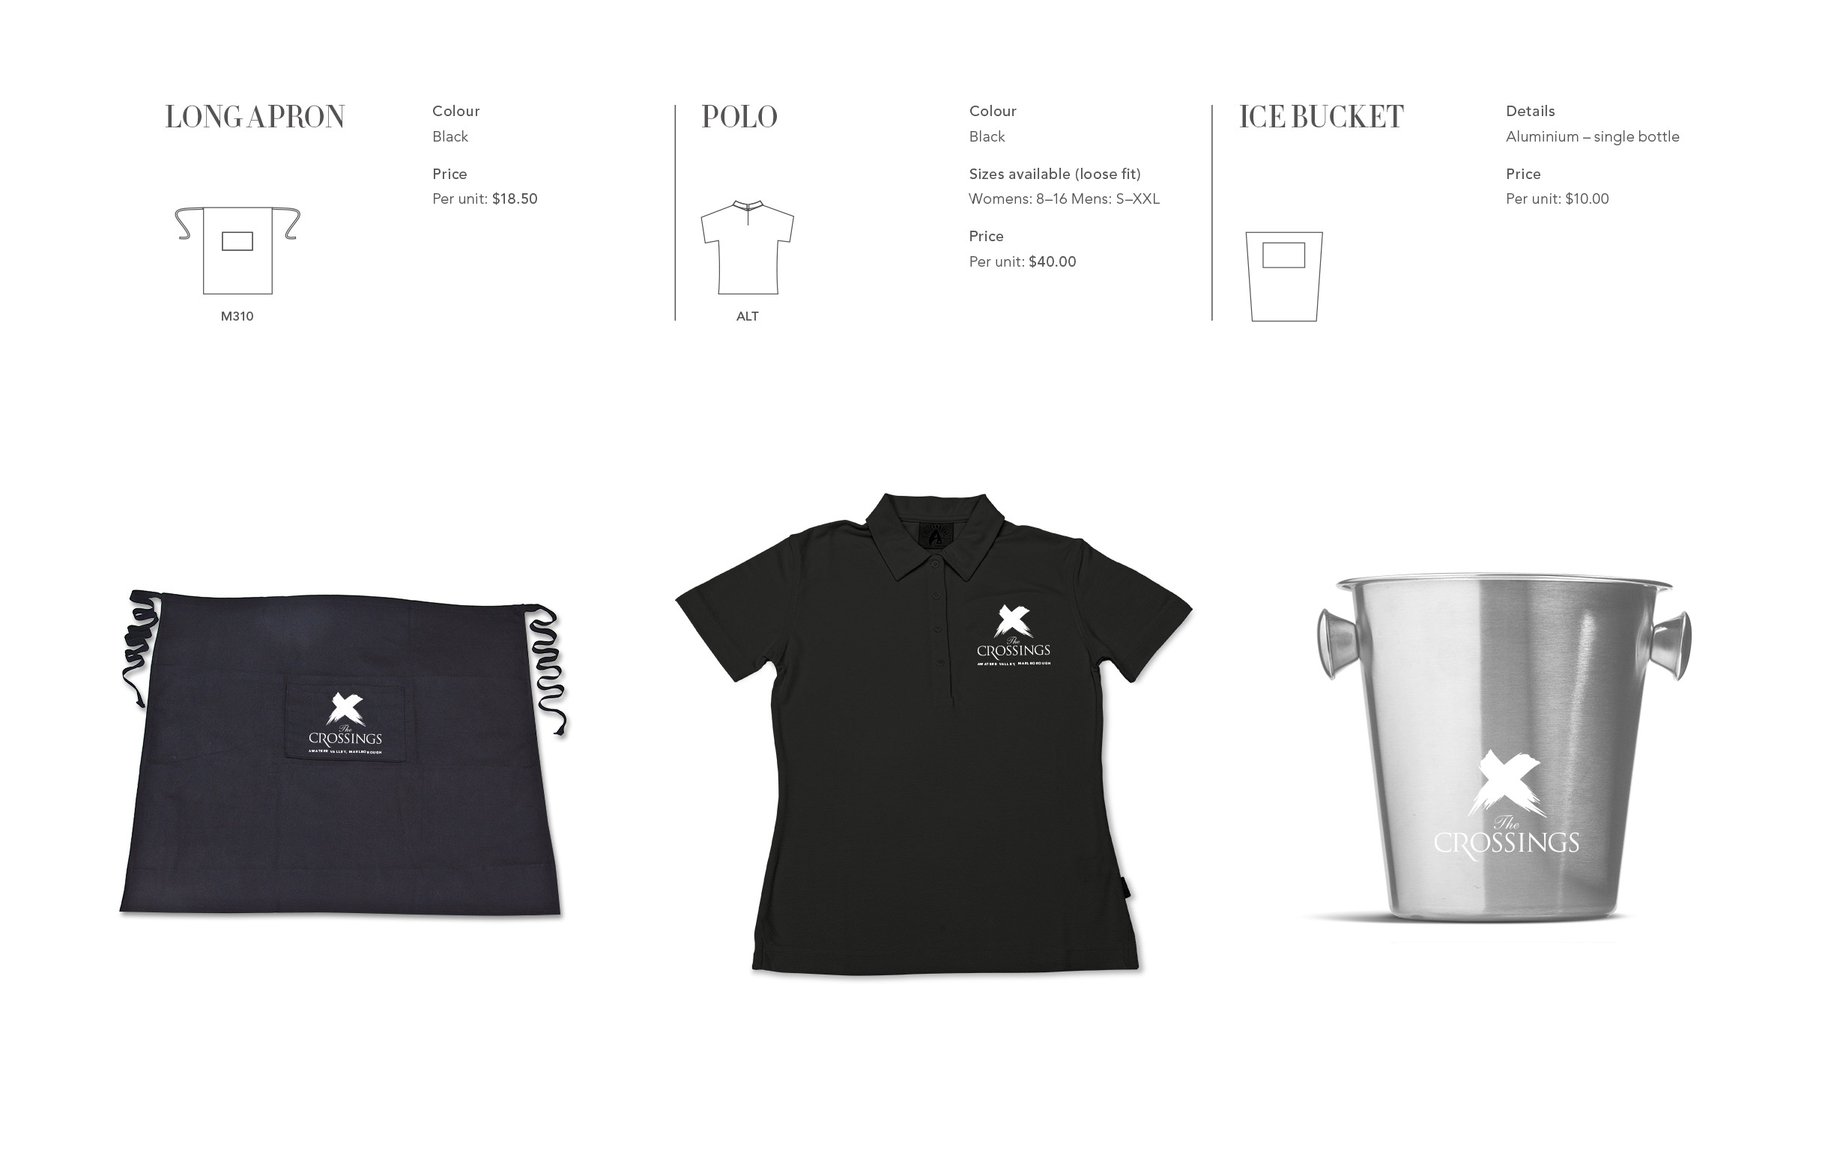 The Crossings uniform and collateral design